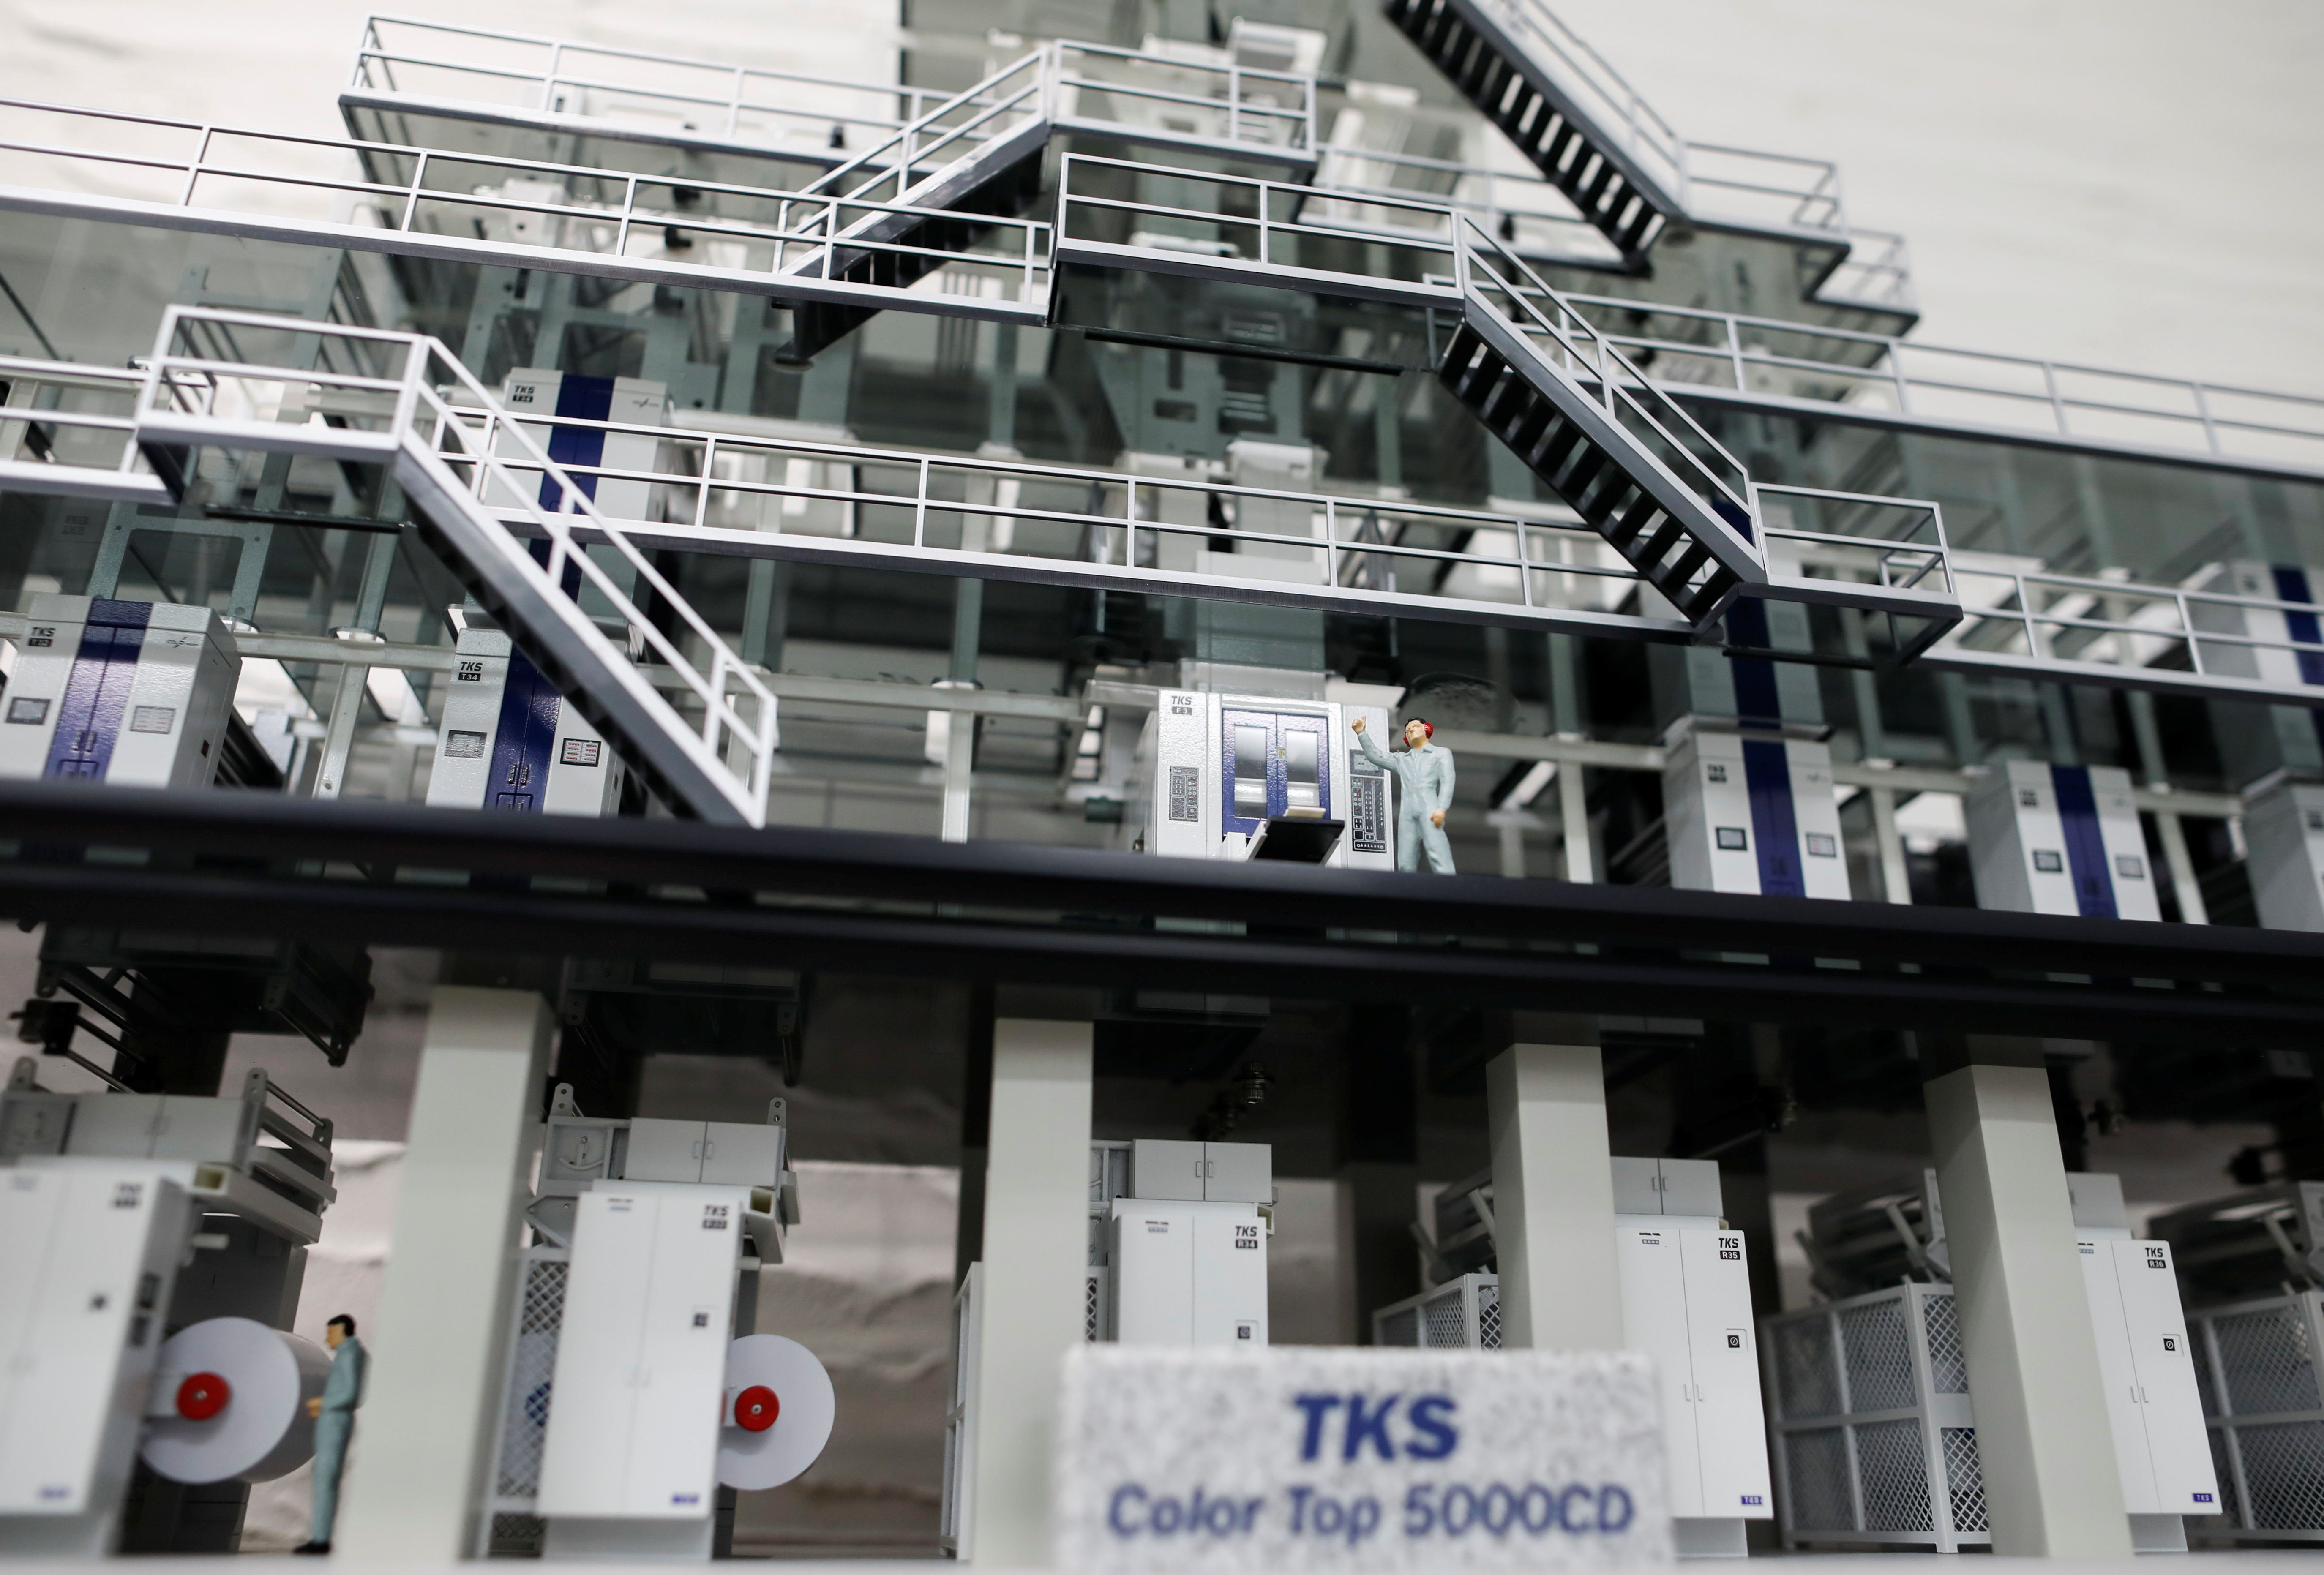 A miniature model of Tokyo Kikai Seisakusho Ltd.'s Color Top 5000CD newspaper rotary press is displayed at the company headquarters office in Tokyo, Japan October 21, 2021. REUTERS/Issei Kato